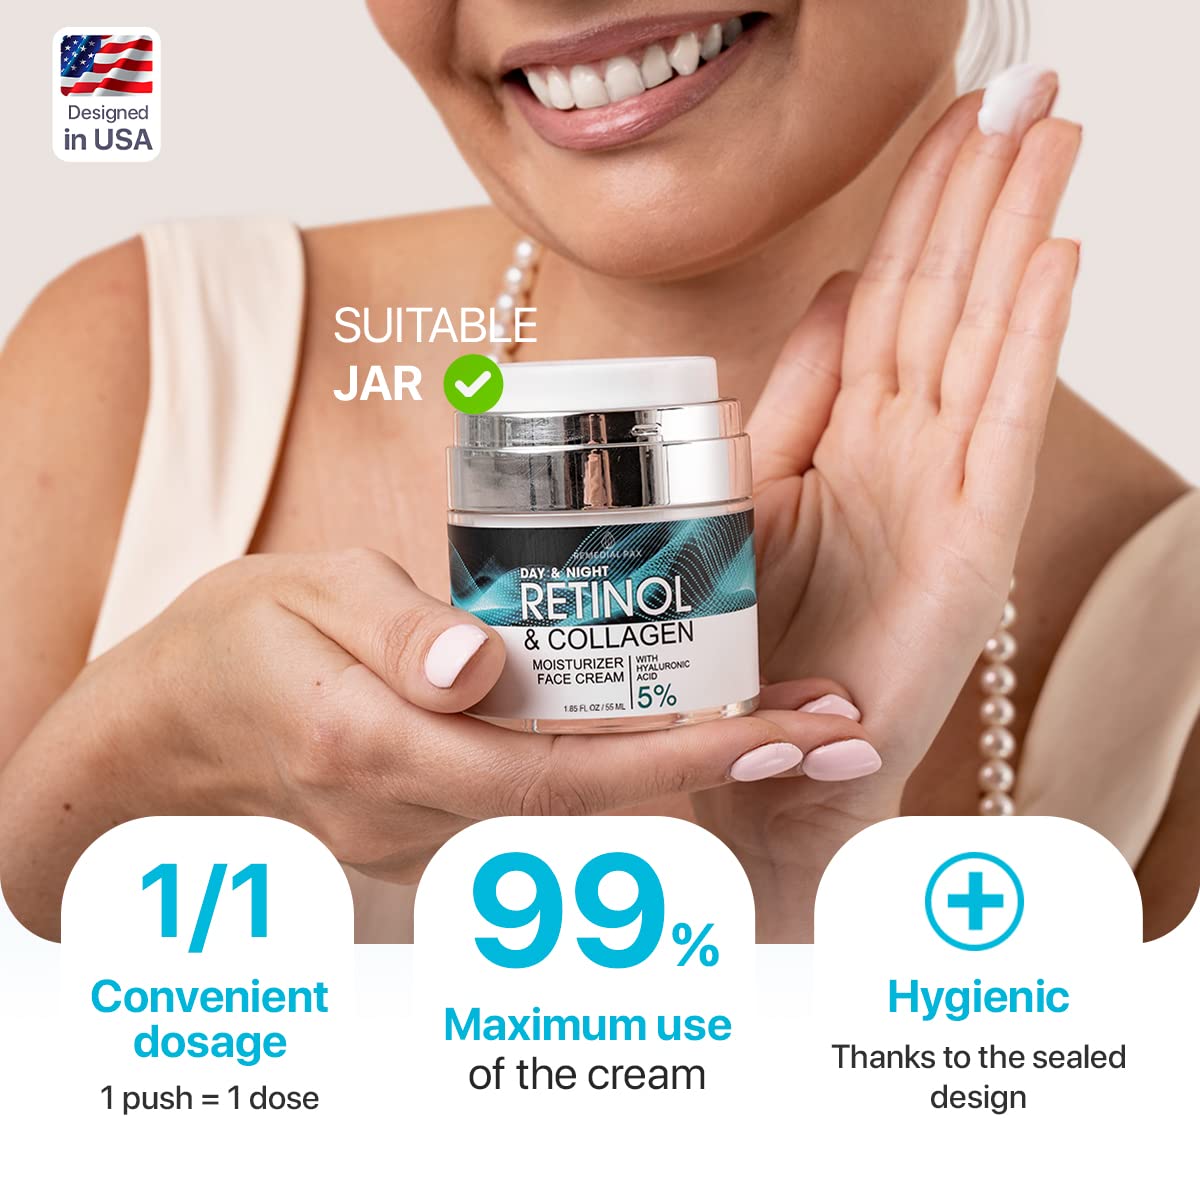 Wholesale prices with free shipping all over United States Face Moisturizer Retinol Cream - Day & Night Moisturizing Cream - Neck & Neckline Cream with Collagen & Hyaluronic Acid - Skin Care Facial Moisturizer for Women & Men - Steven Deals